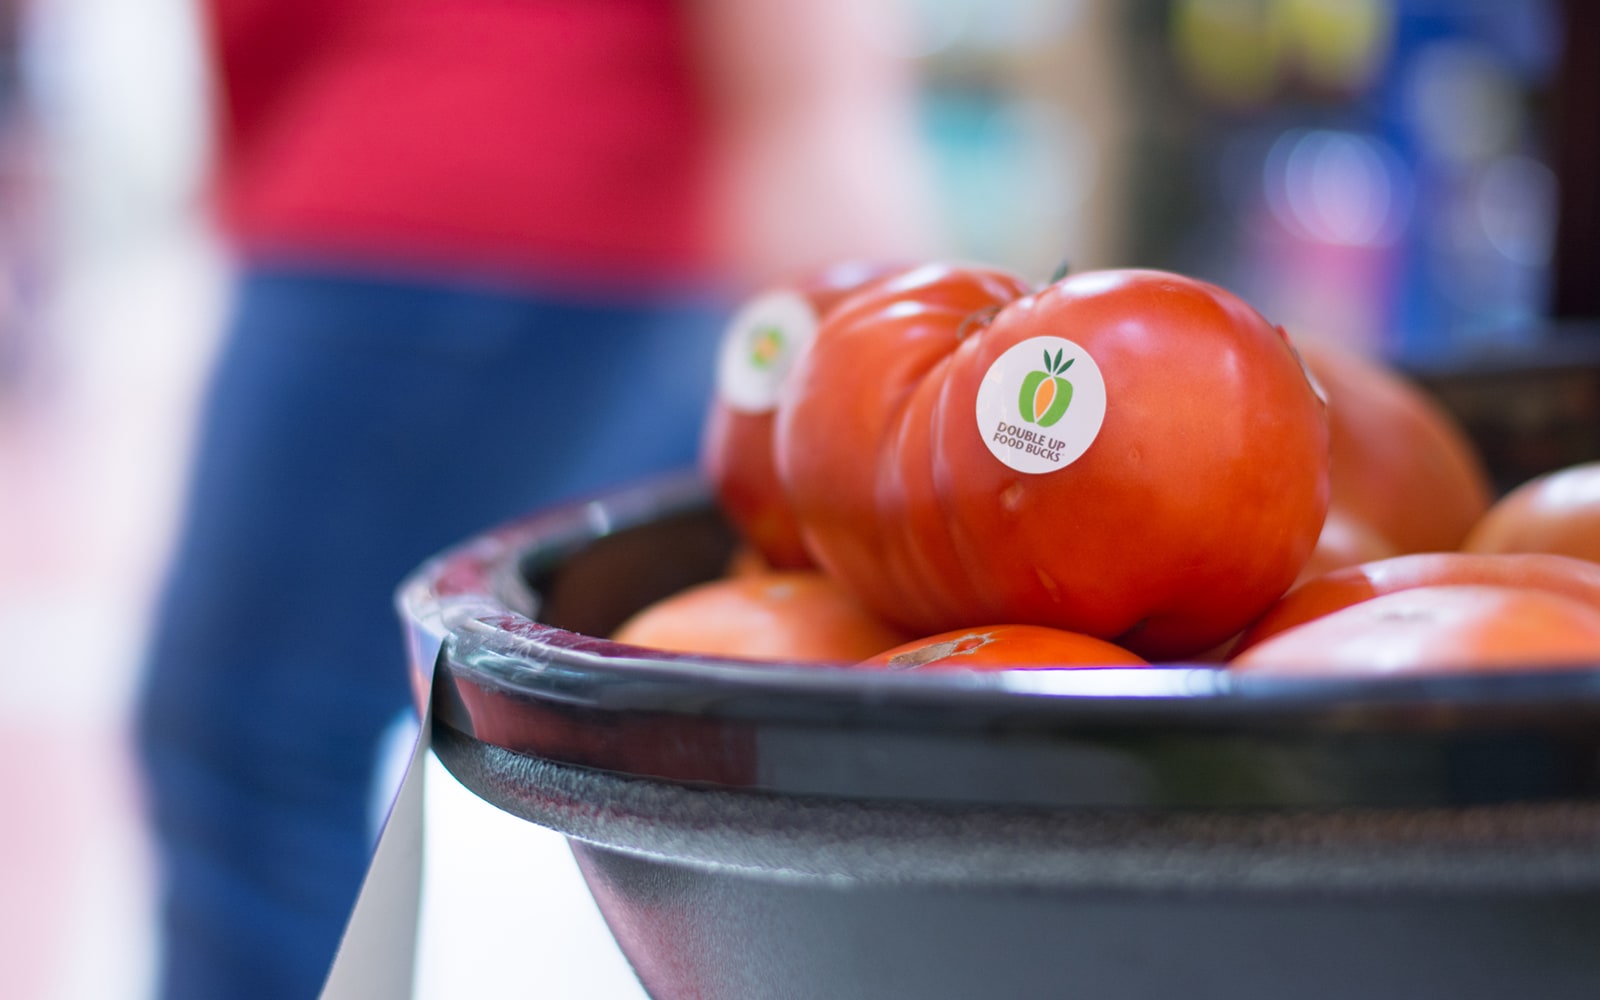 A basket of bright red tomatoes with Double Up Food Bucks stickers on them